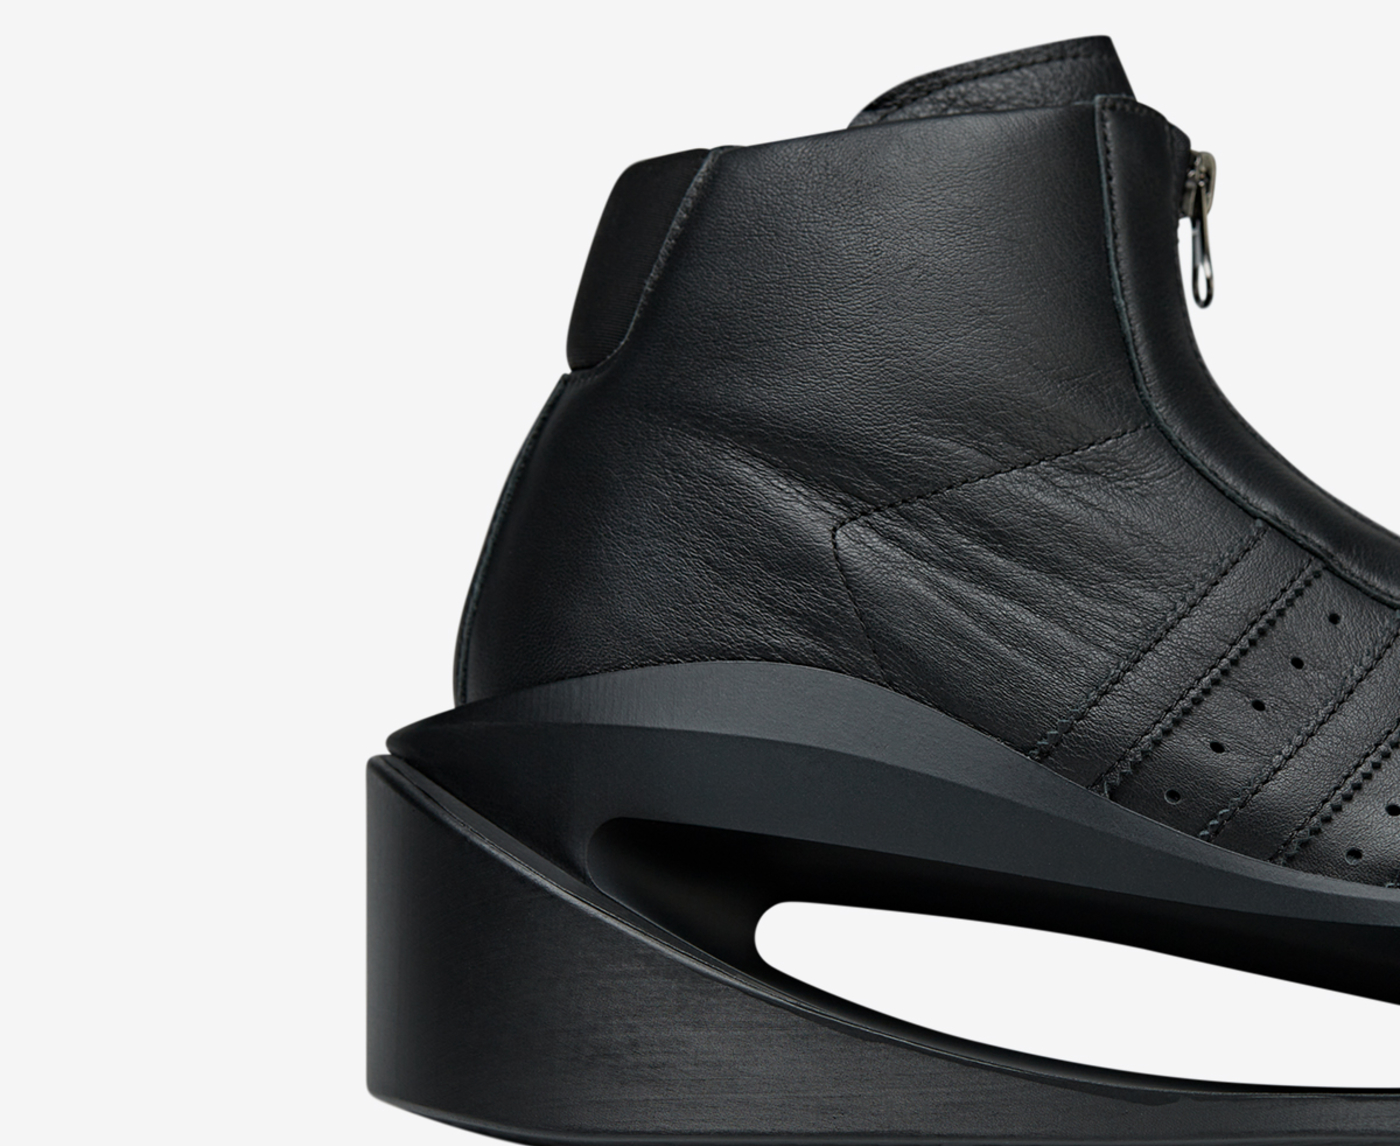 Y-3 - Y-3 Gendo Pro Model.​ The Y-3 Chapter 4 collection is